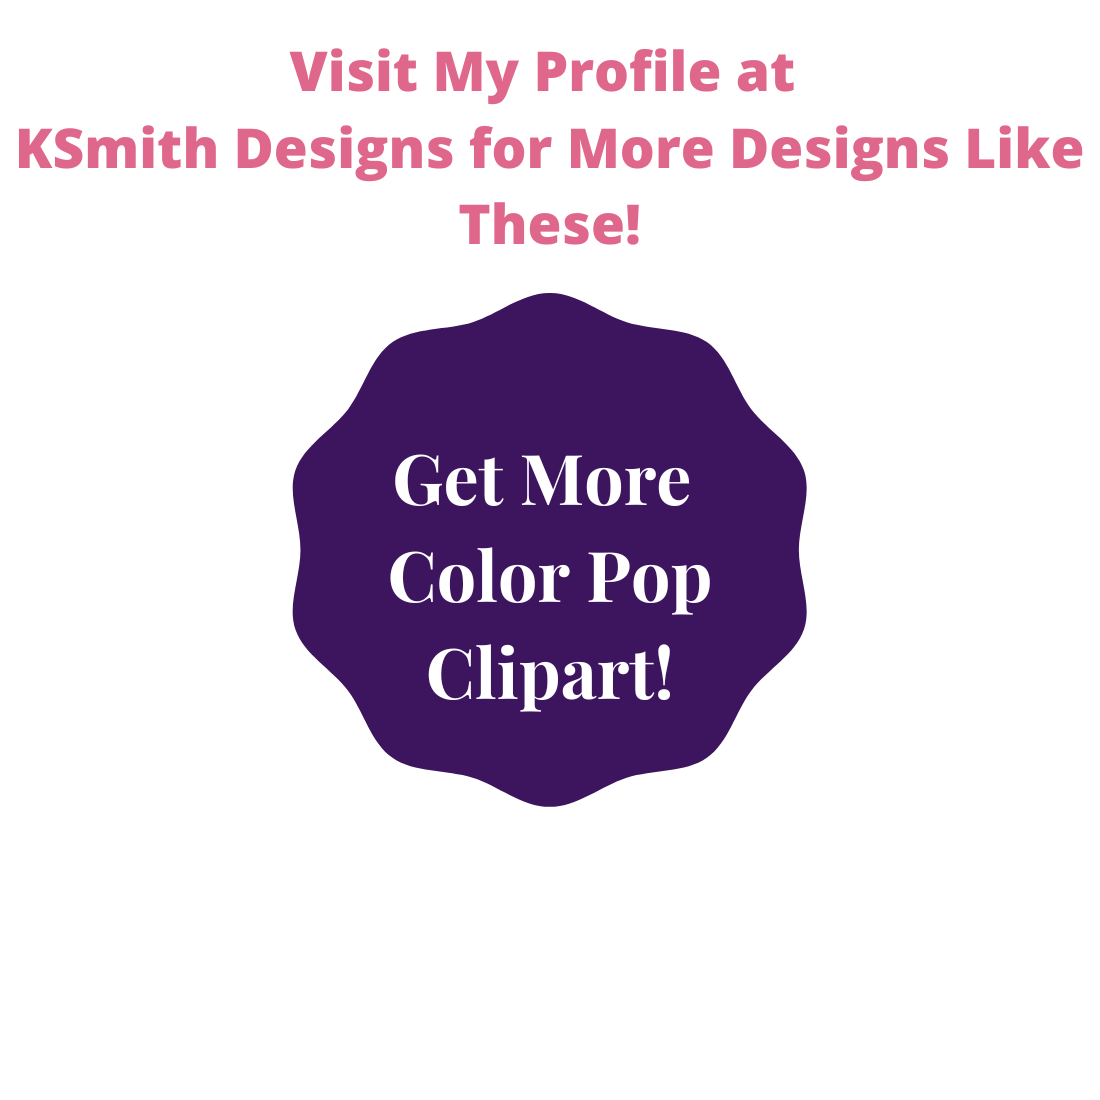 15 COLOR POP CLIPART IMAGES OF CLICK HERE TO GET BUTTONS preview image.